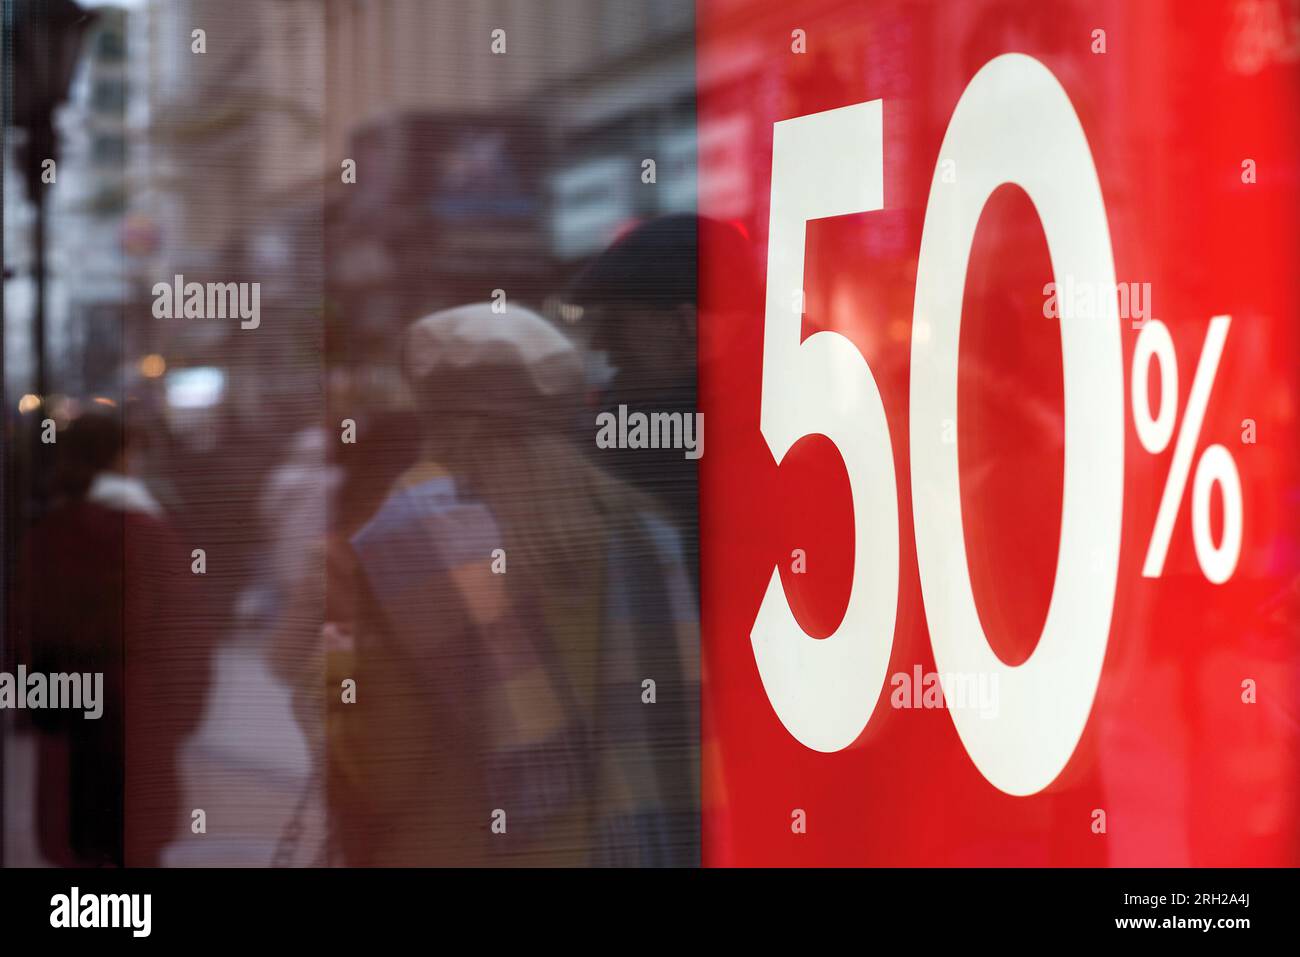 50 percent discount sign against crowd reflected in a store window Stock Photo